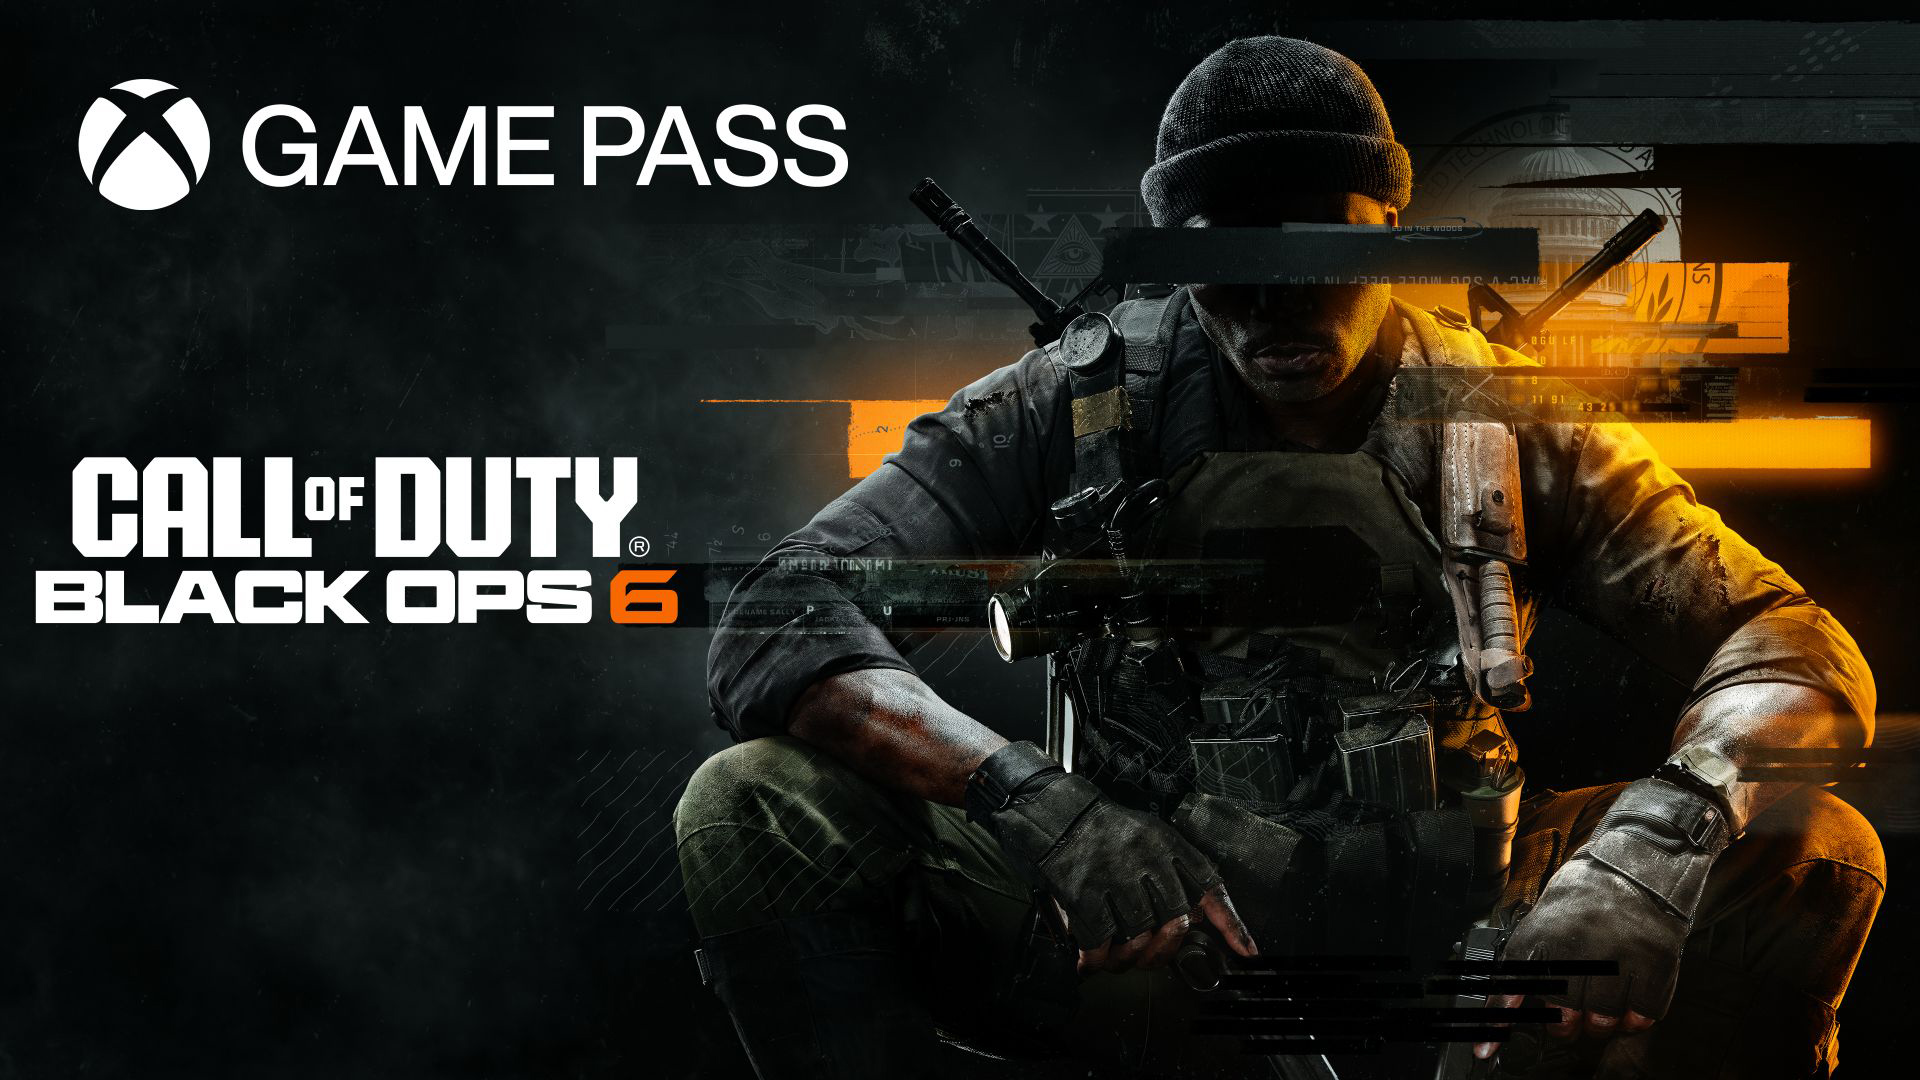 Xbox has confirmed Call of Duty: Black Ops 6 will be available on Game Pass day one